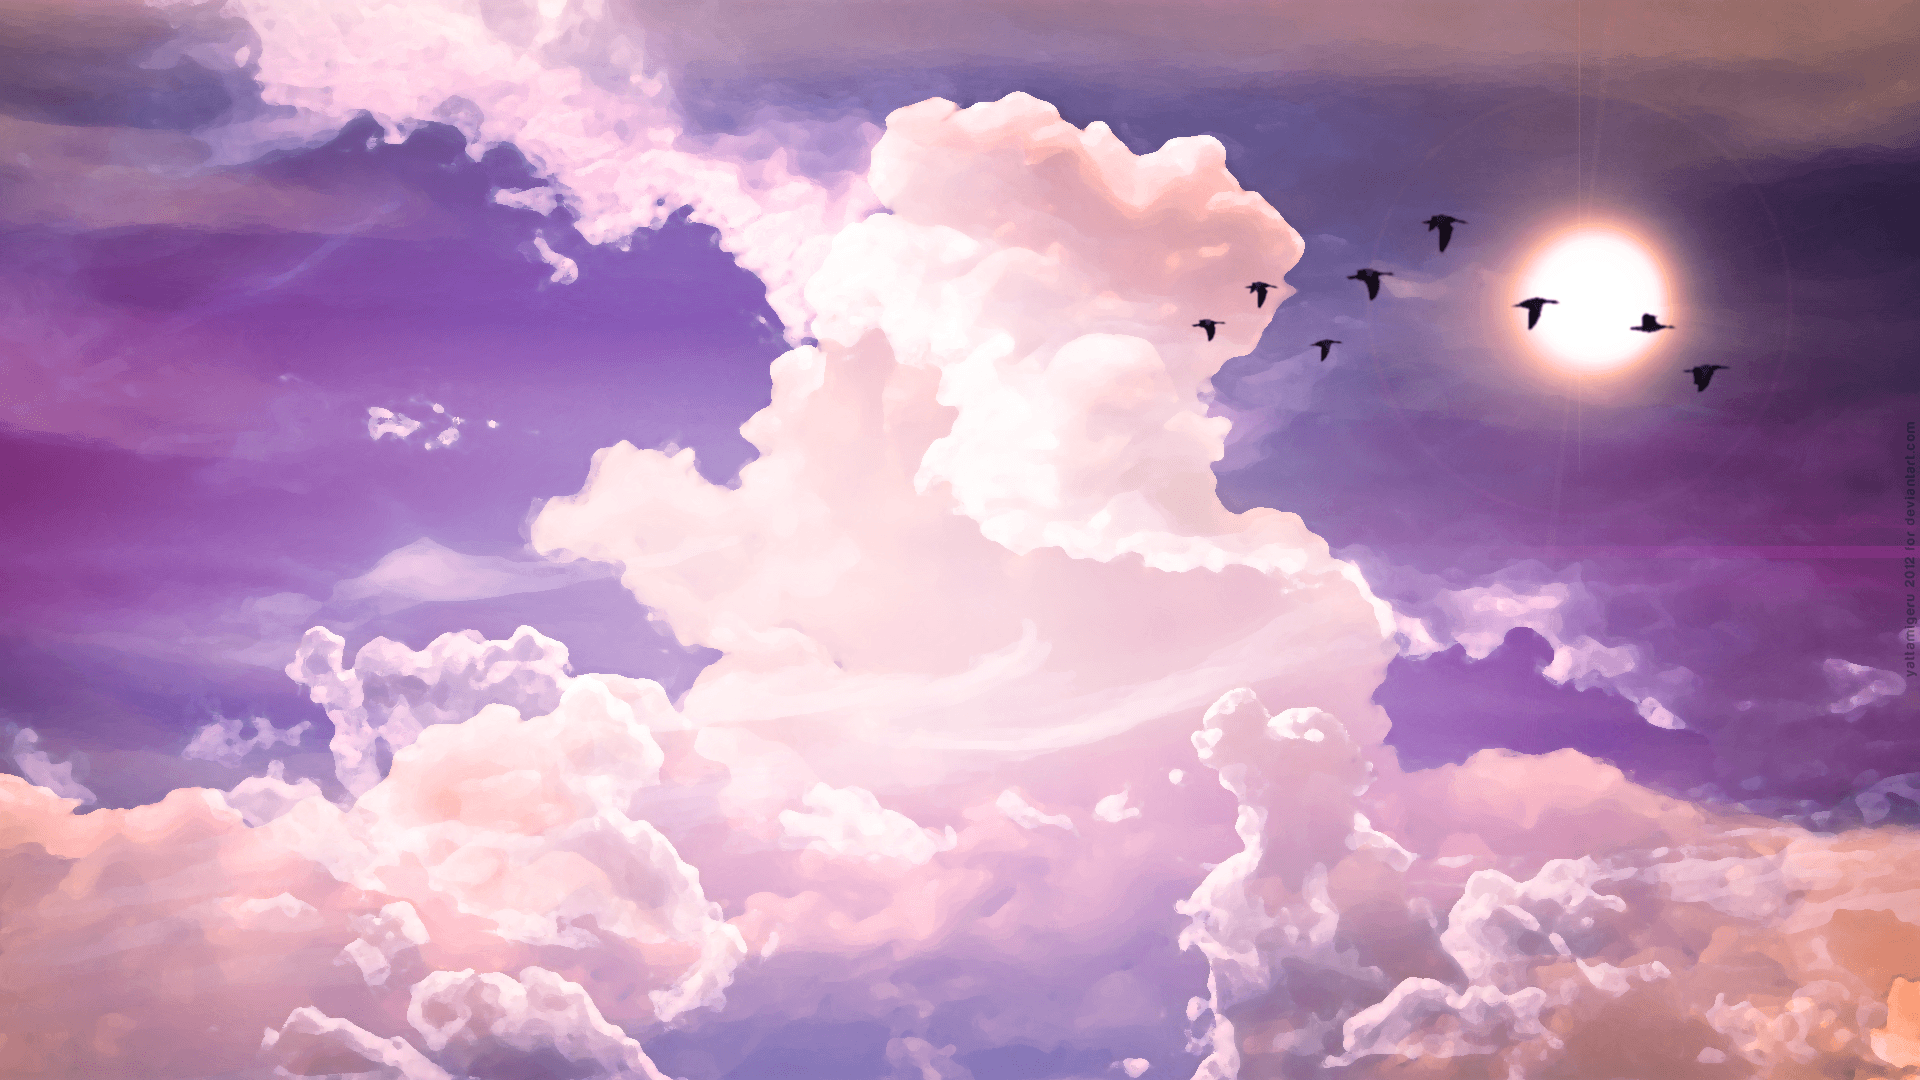 Pink And Purple Aesthetic Sky 1920x1080 Wallpapers - Wallpaper Cave